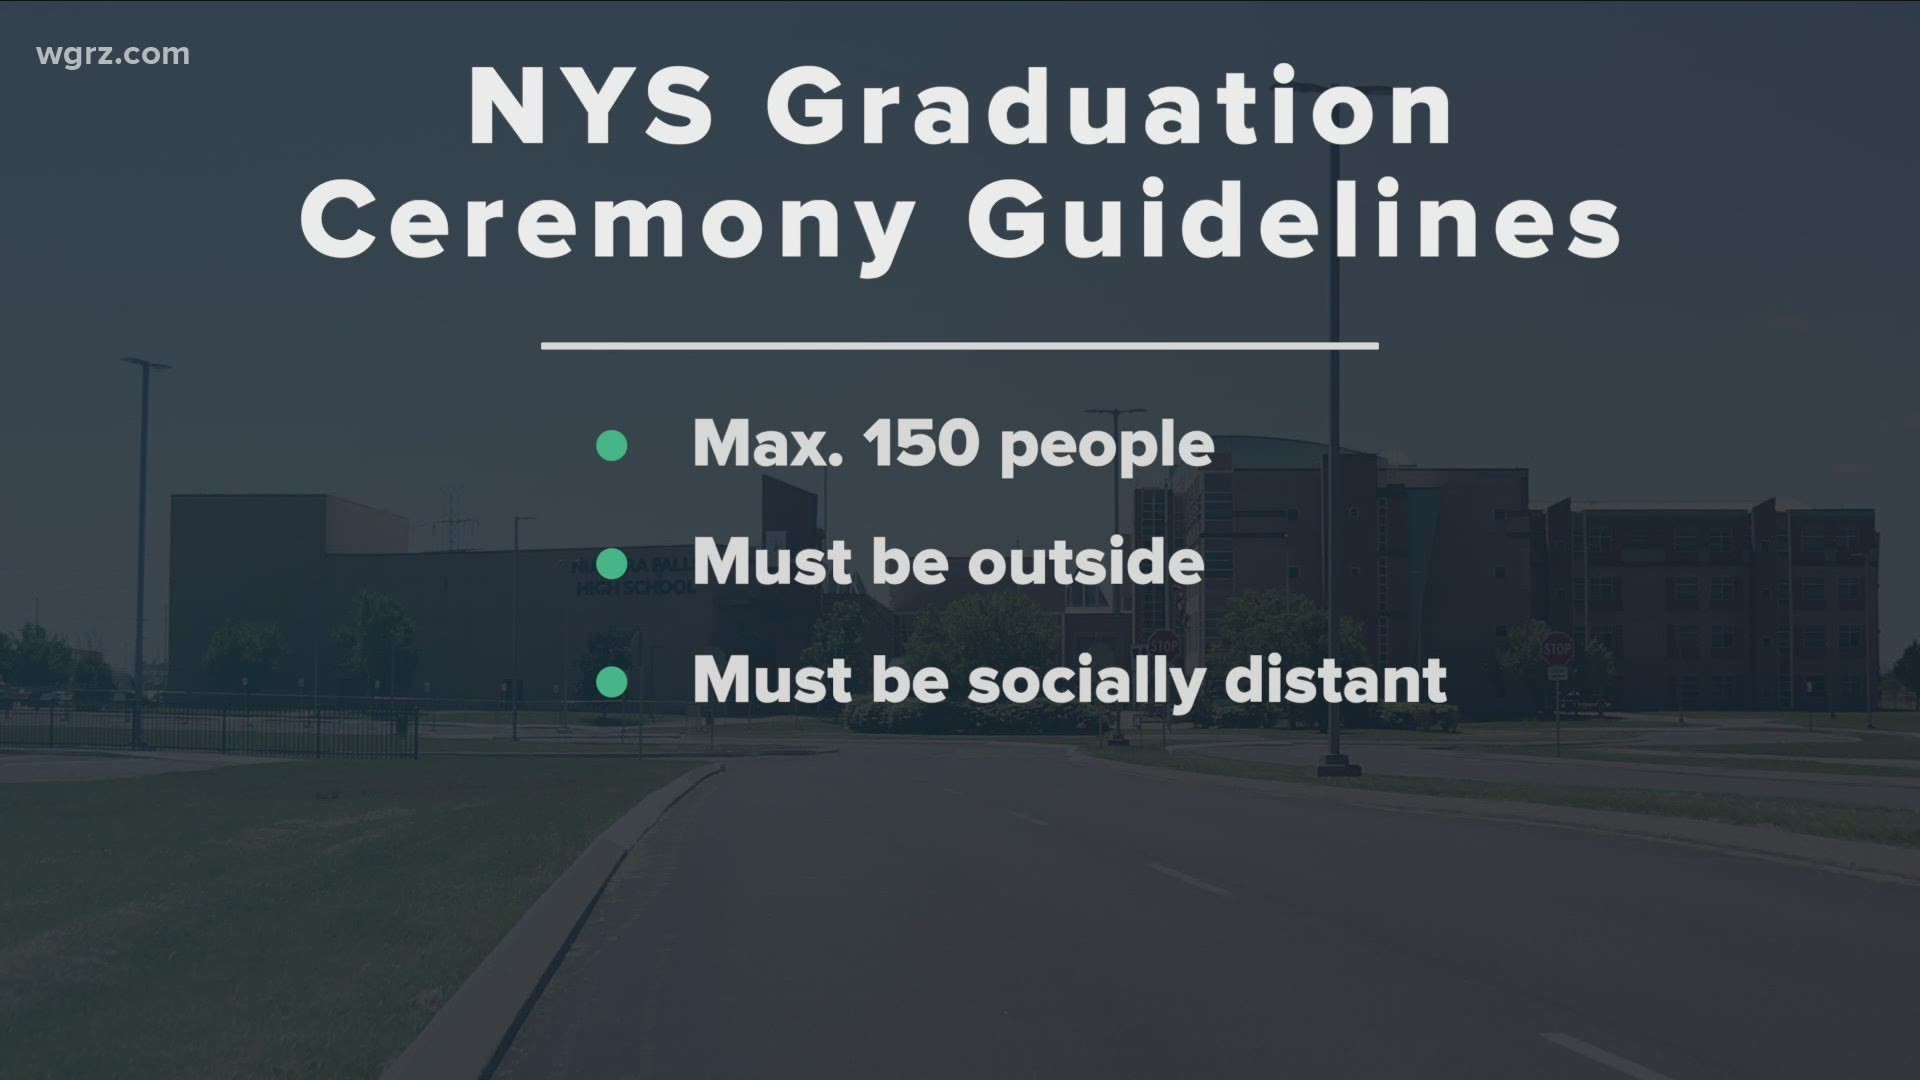 New rules for graduations in NYS